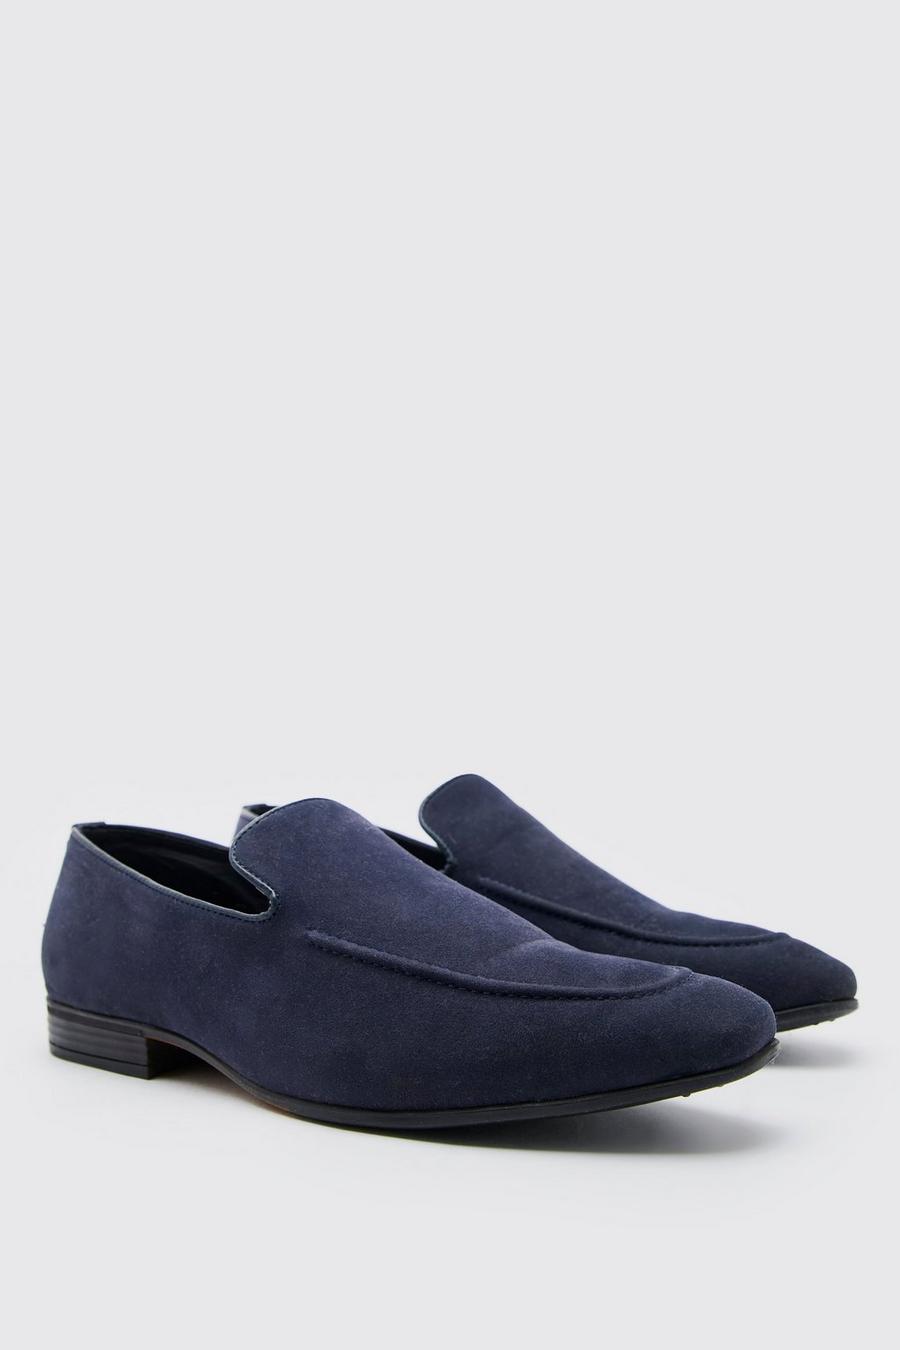 Navy azul marino Faux Suede Loafer